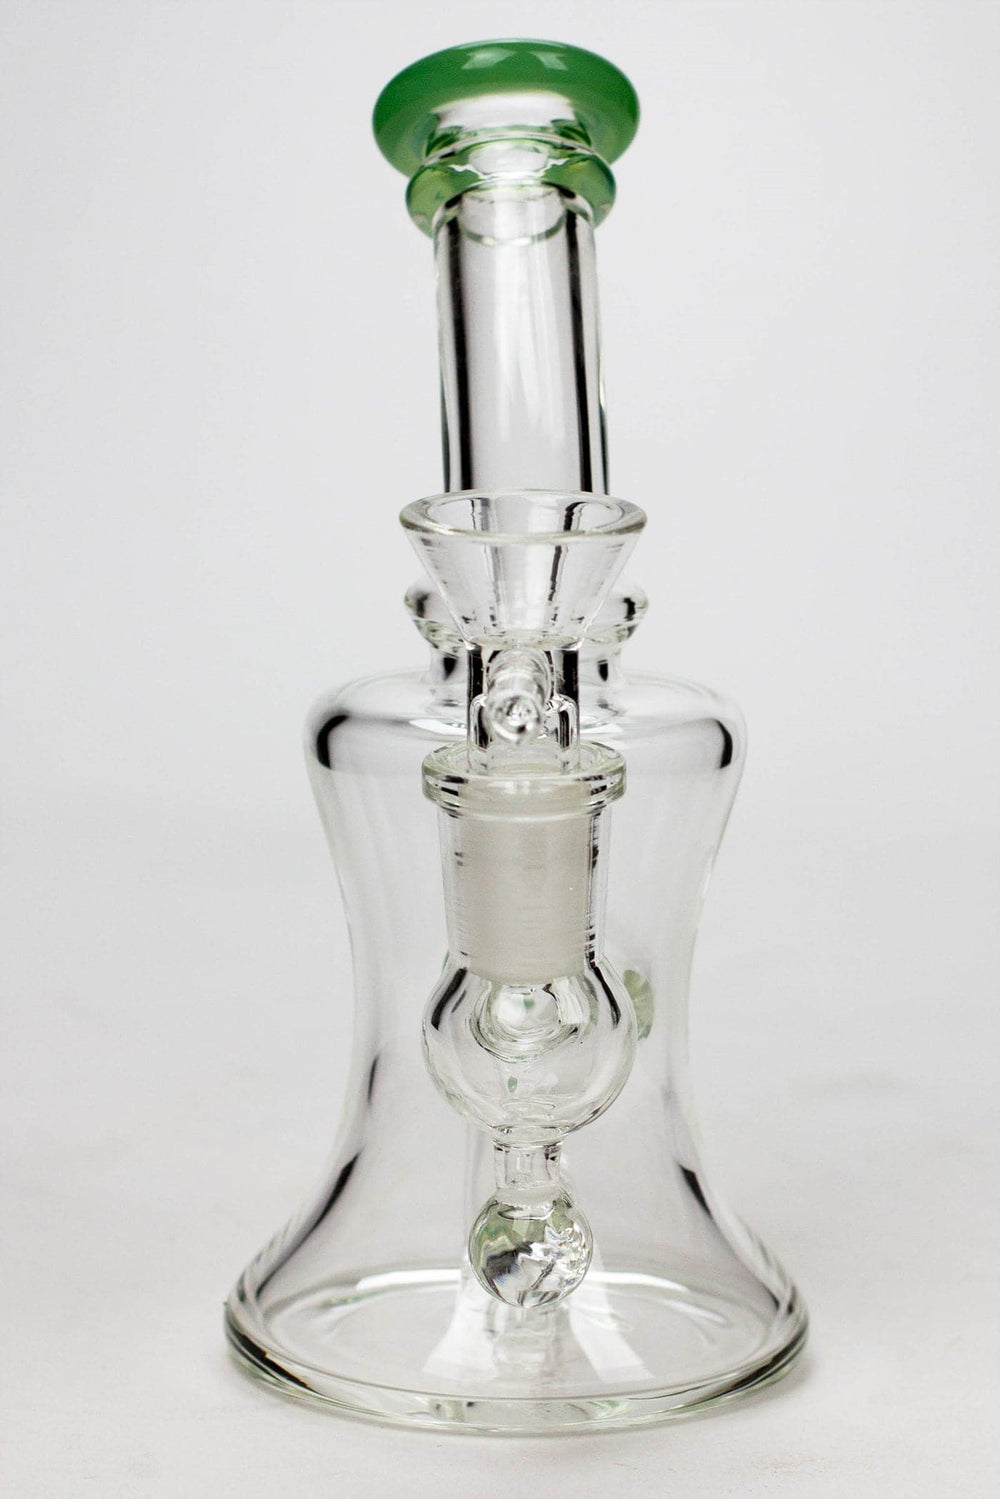 Fixed 3 hole diffuser skirt bubbler_1